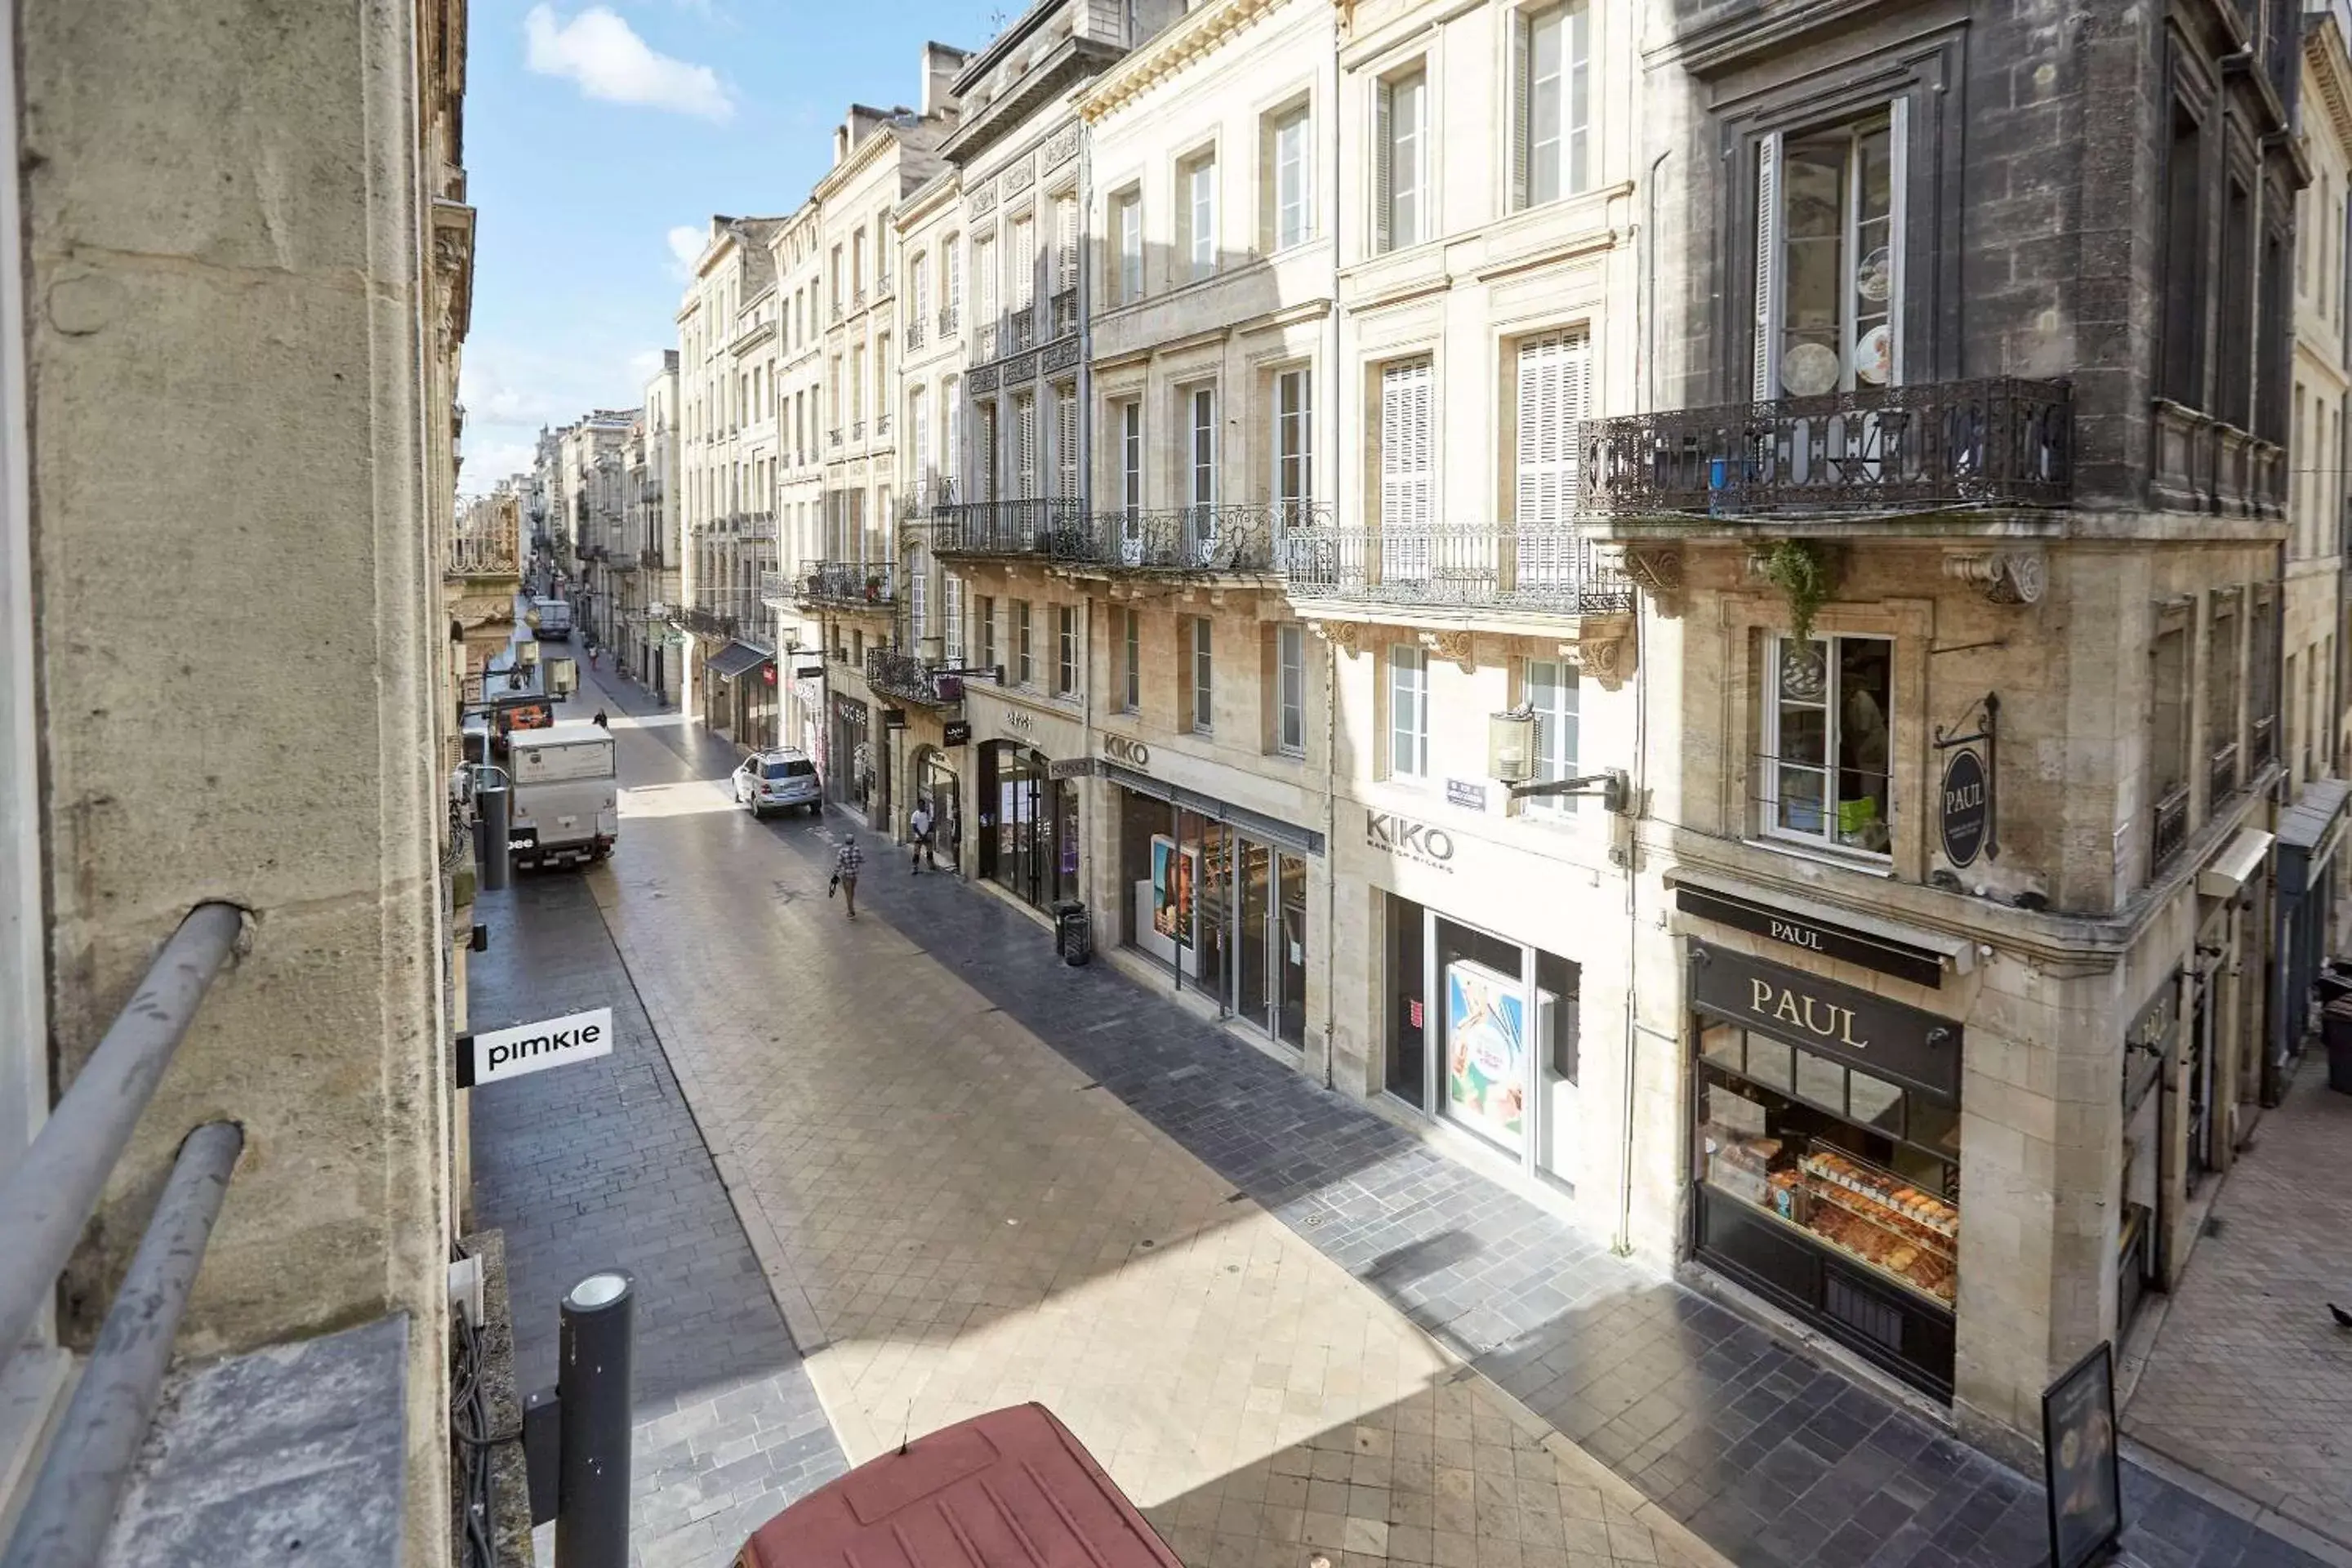 Property building in Quality Hotel Bordeaux Centre